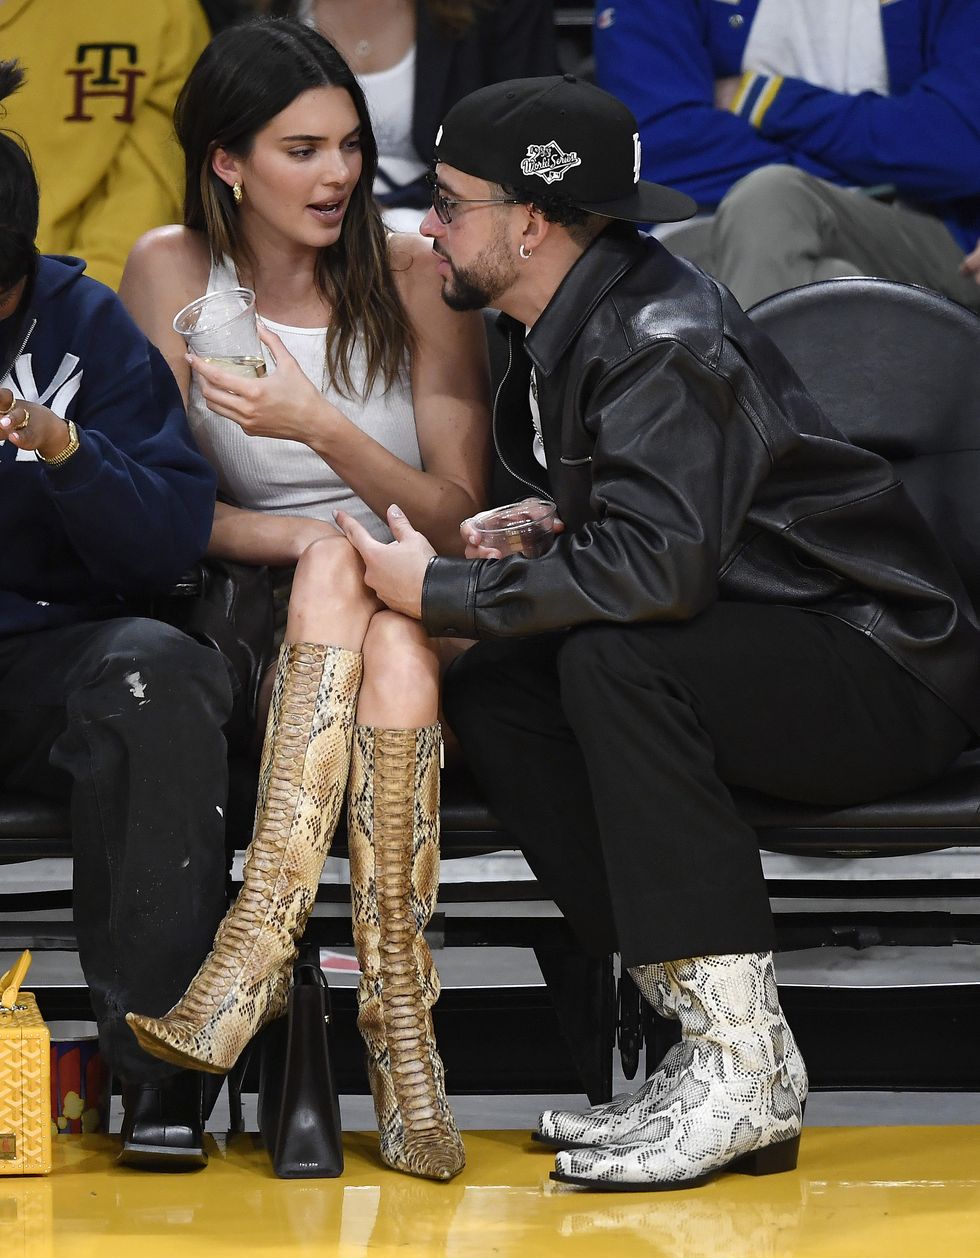 Kendall Jenner and Bad Bunny turn up the heat at Lakers-Warriors game